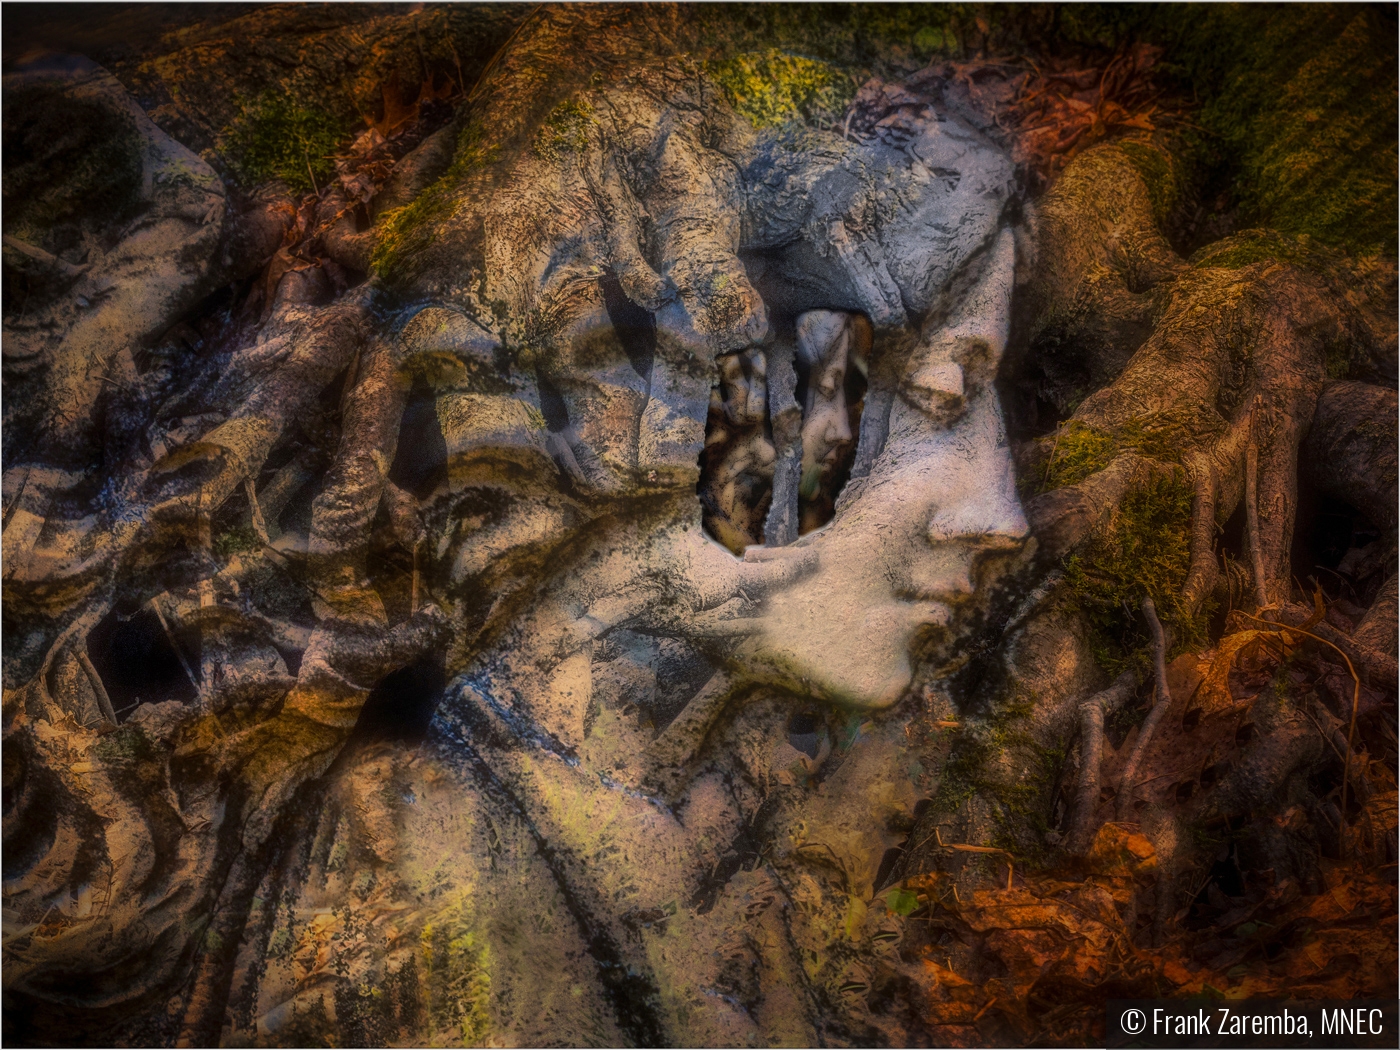 The Lady Of The Forest by Frank Zaremba, MNEC